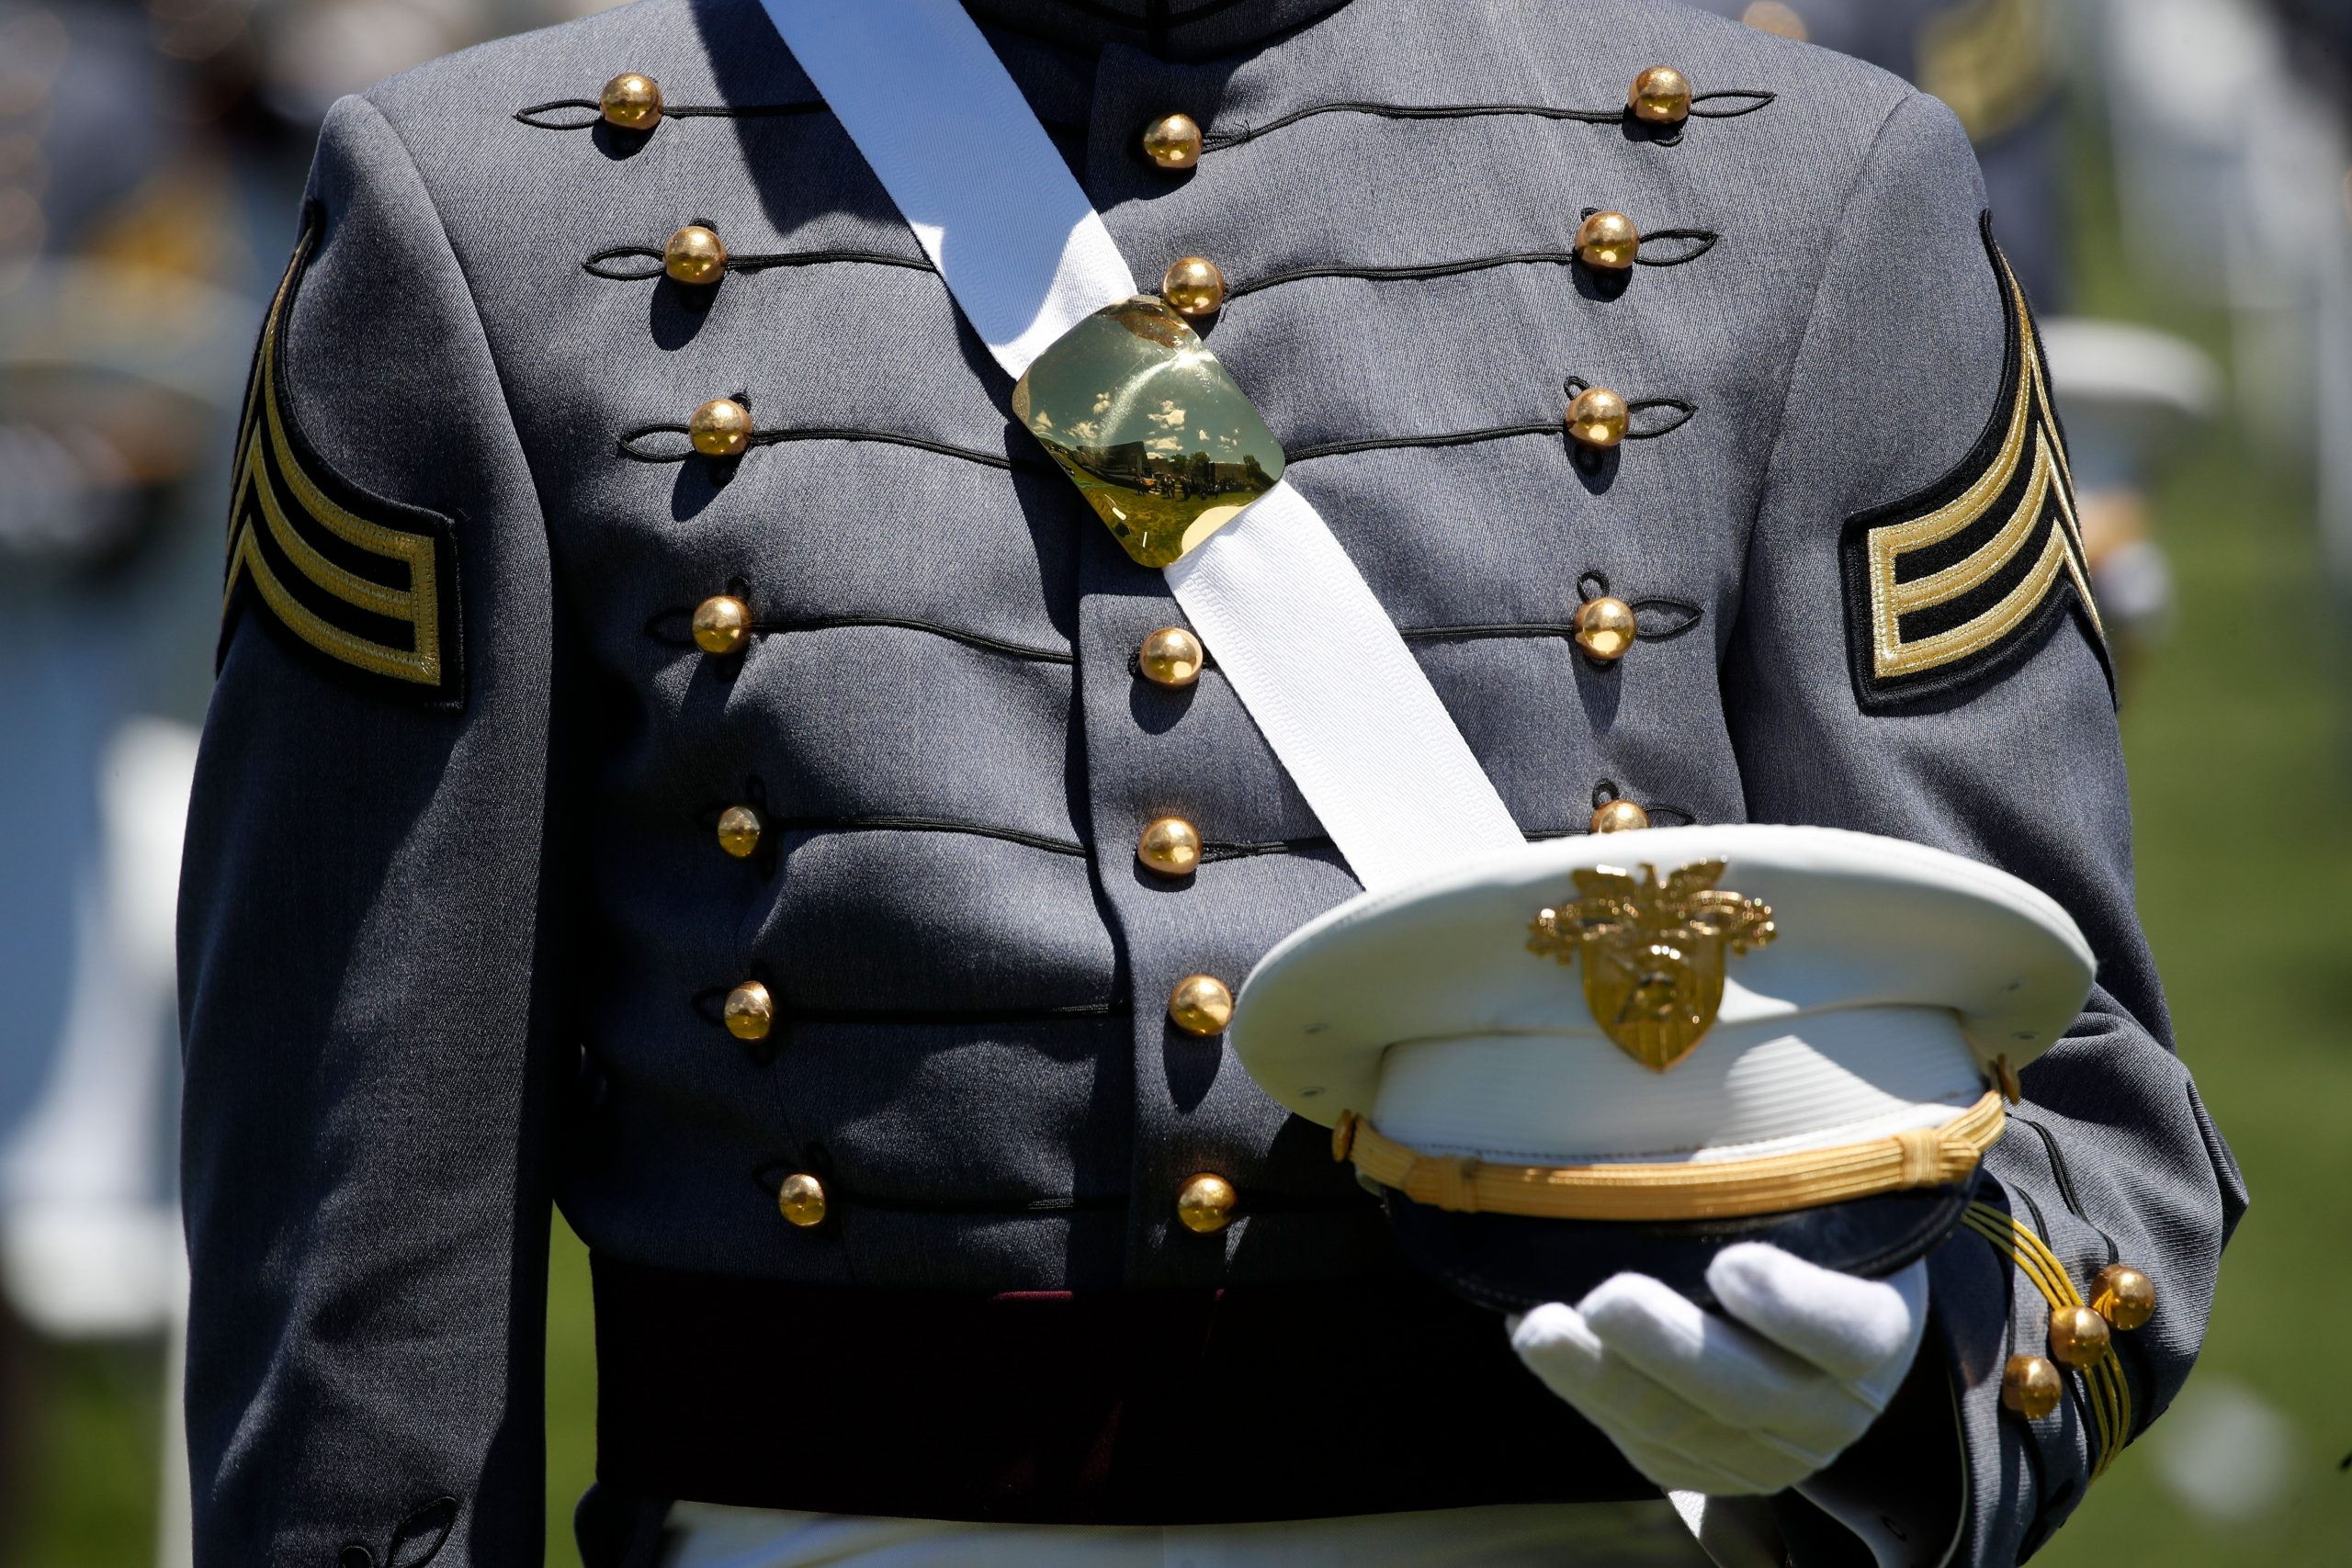 Sexual assault reports at US military academies increased during 2020-21 school year